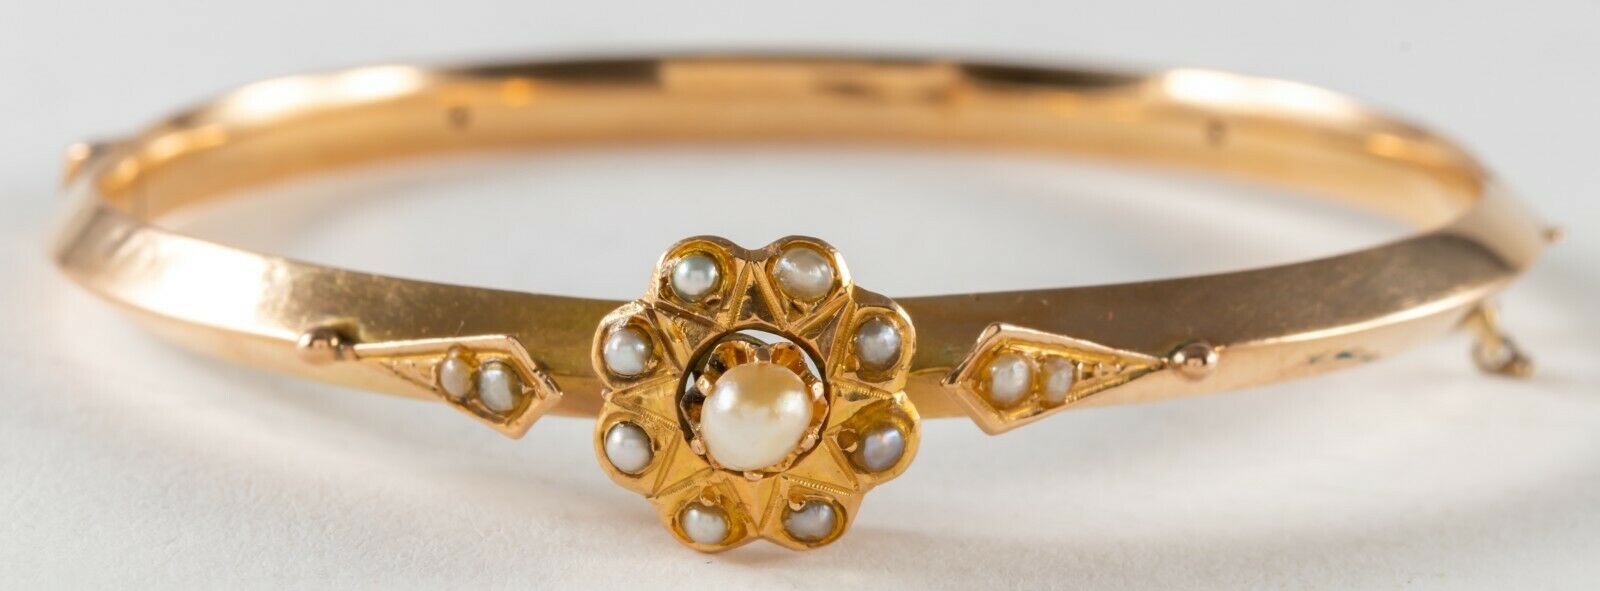 Antique 14k Yellow Gold Bangle Bracelet With Pearls